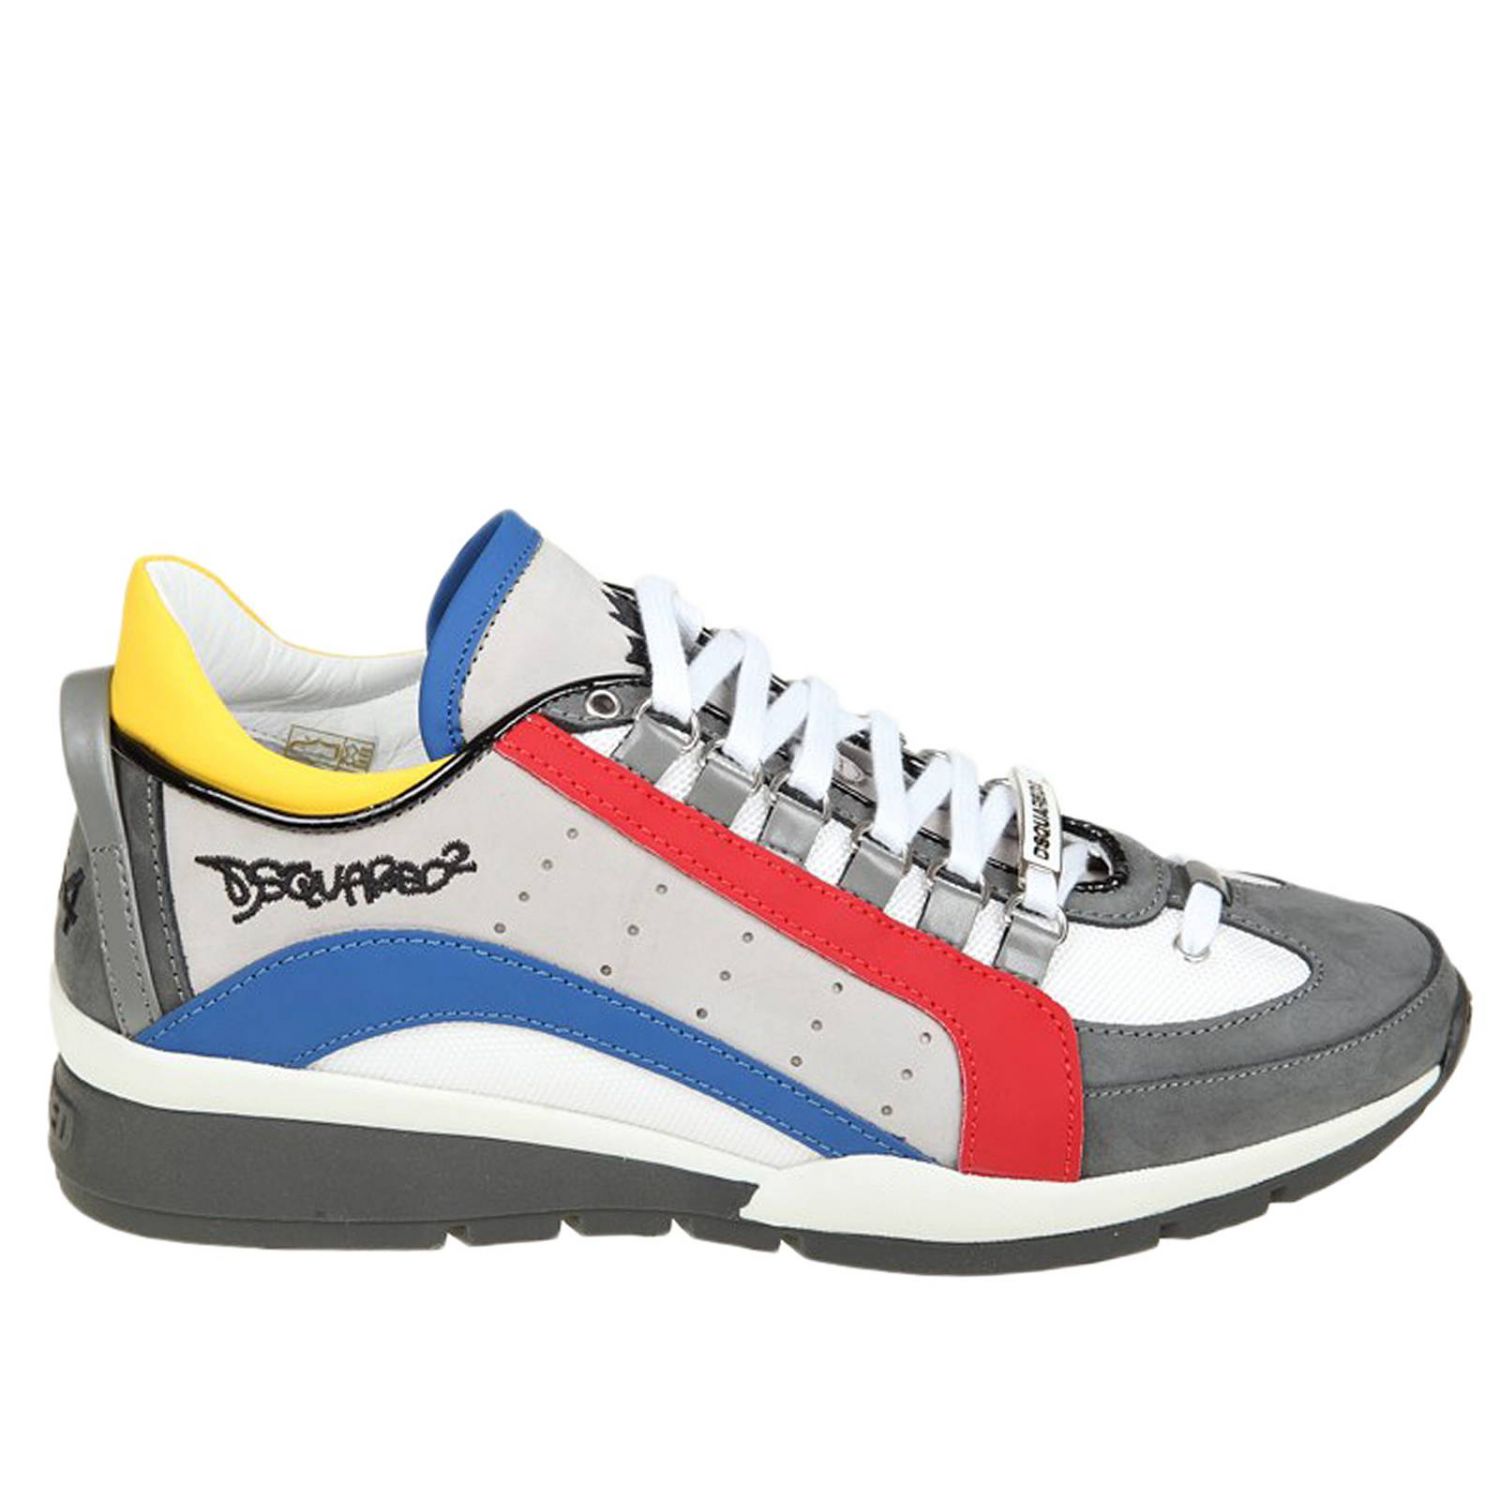 Dsquared2 Outlet: Sneakers men - Grey | Sneakers Dsquared2 W17SN404 718 ...